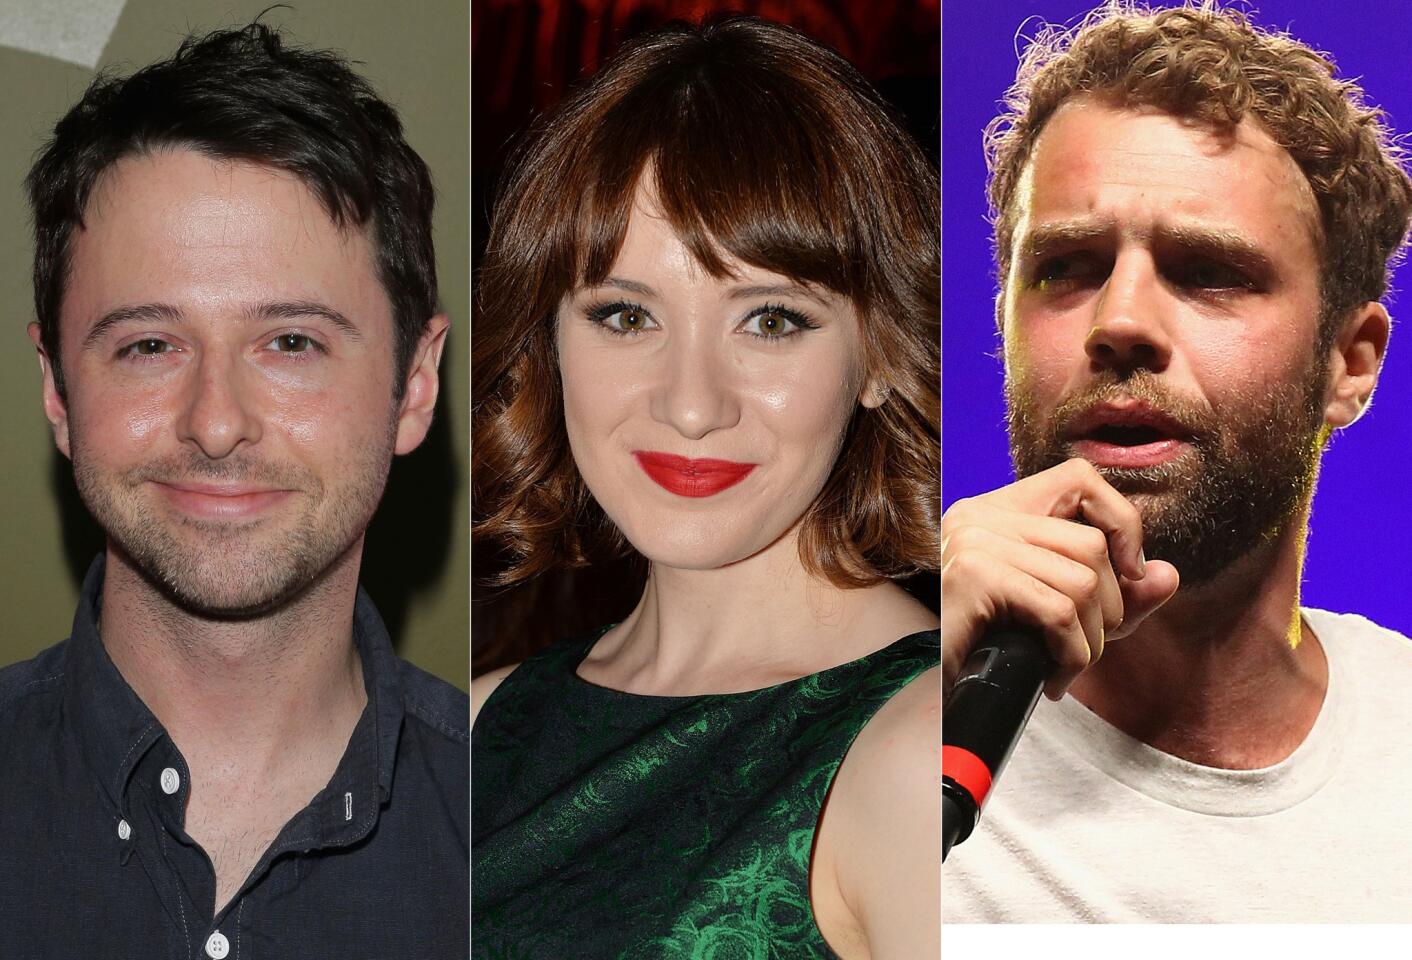 'Saturday Night Live' axes three first-year cast members